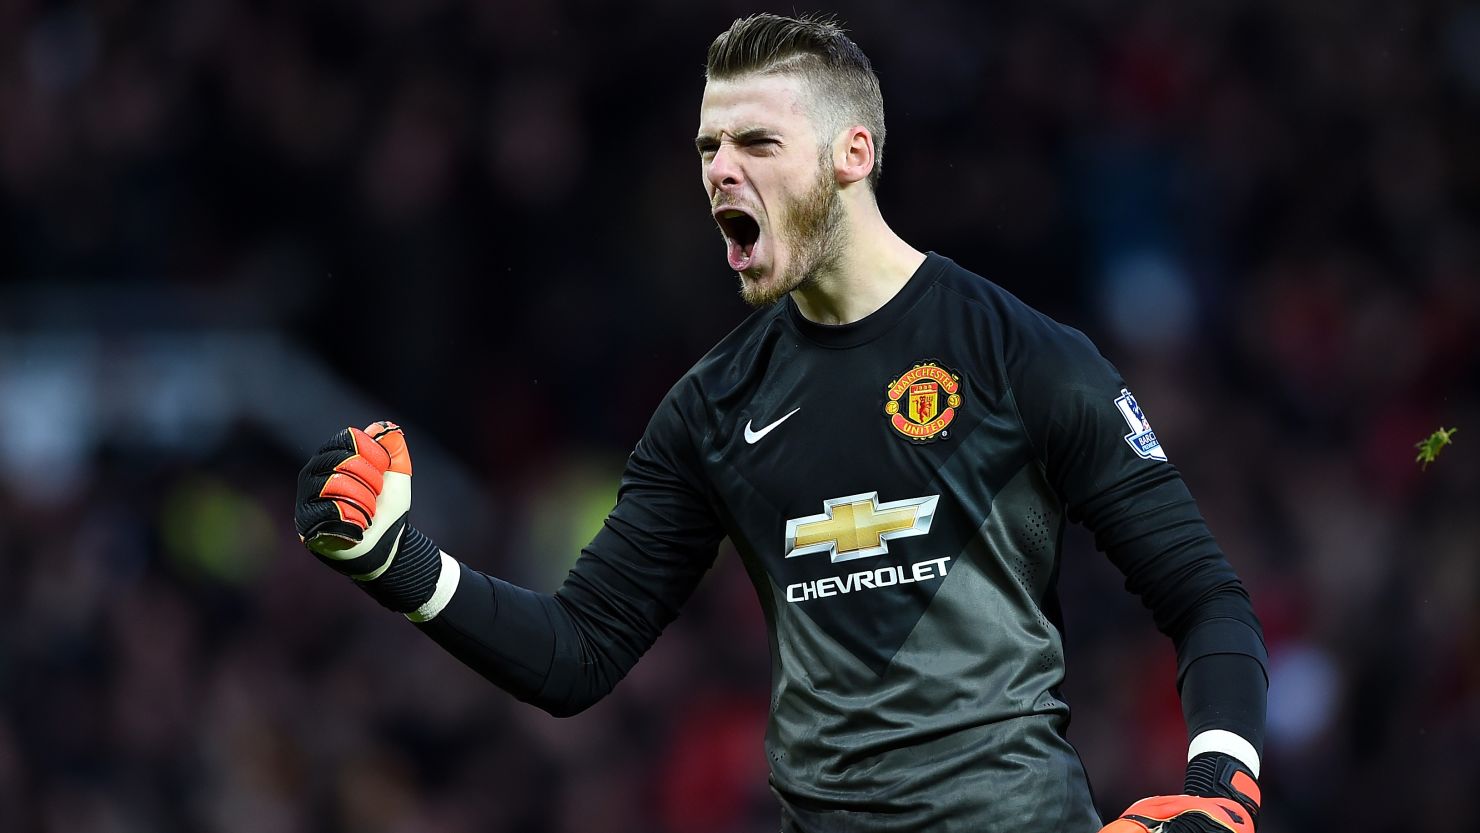 David De Gea was in inspired form as Manchester United beat Liverpool 3-0 in English Premier League.